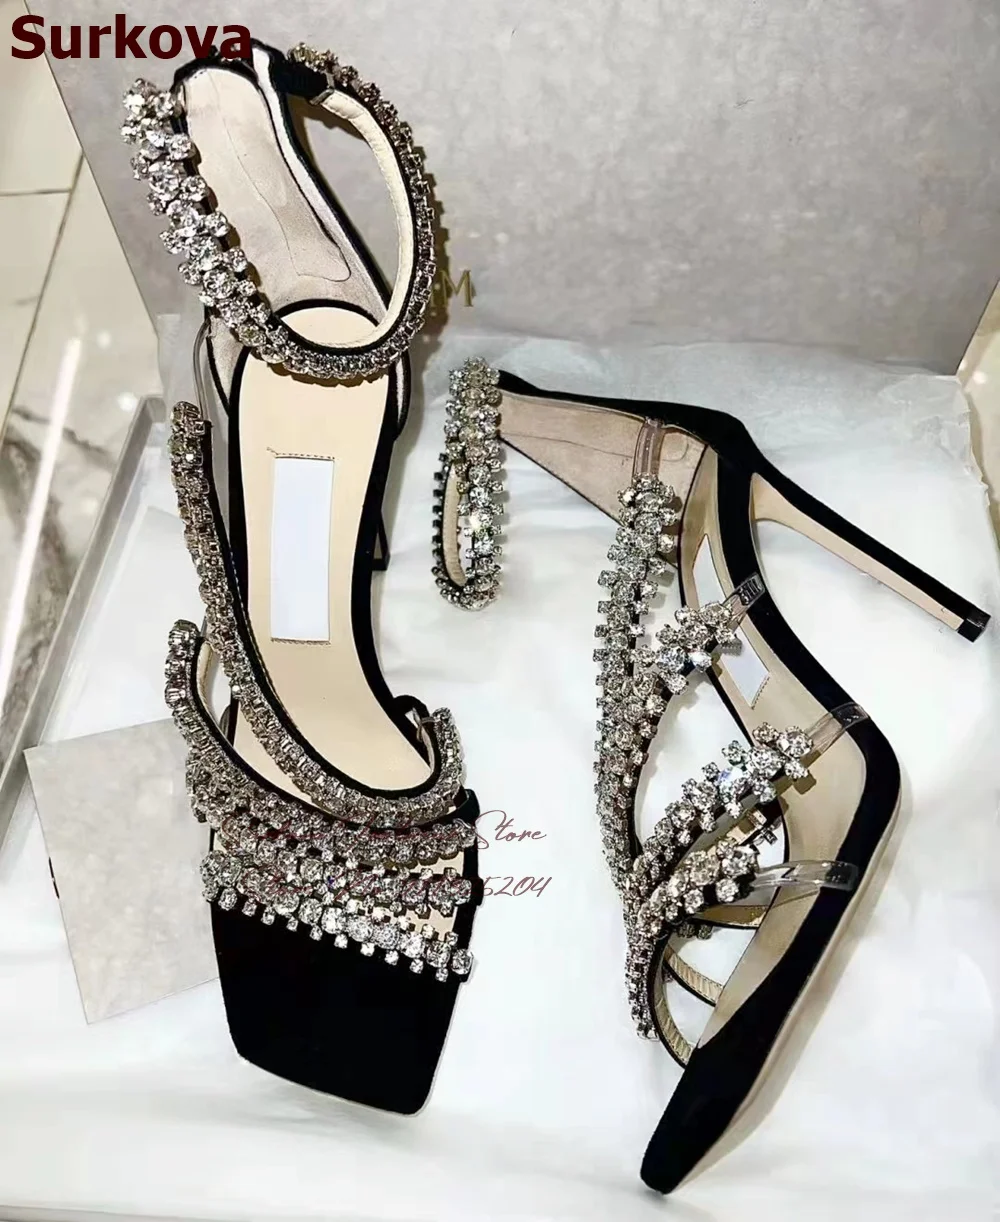 Surkova Bling Bling Crysal Floral Strappy Thin High Heel Sandals Black Suede Square Toe Stiletto Wedding Pumps Rhinestone